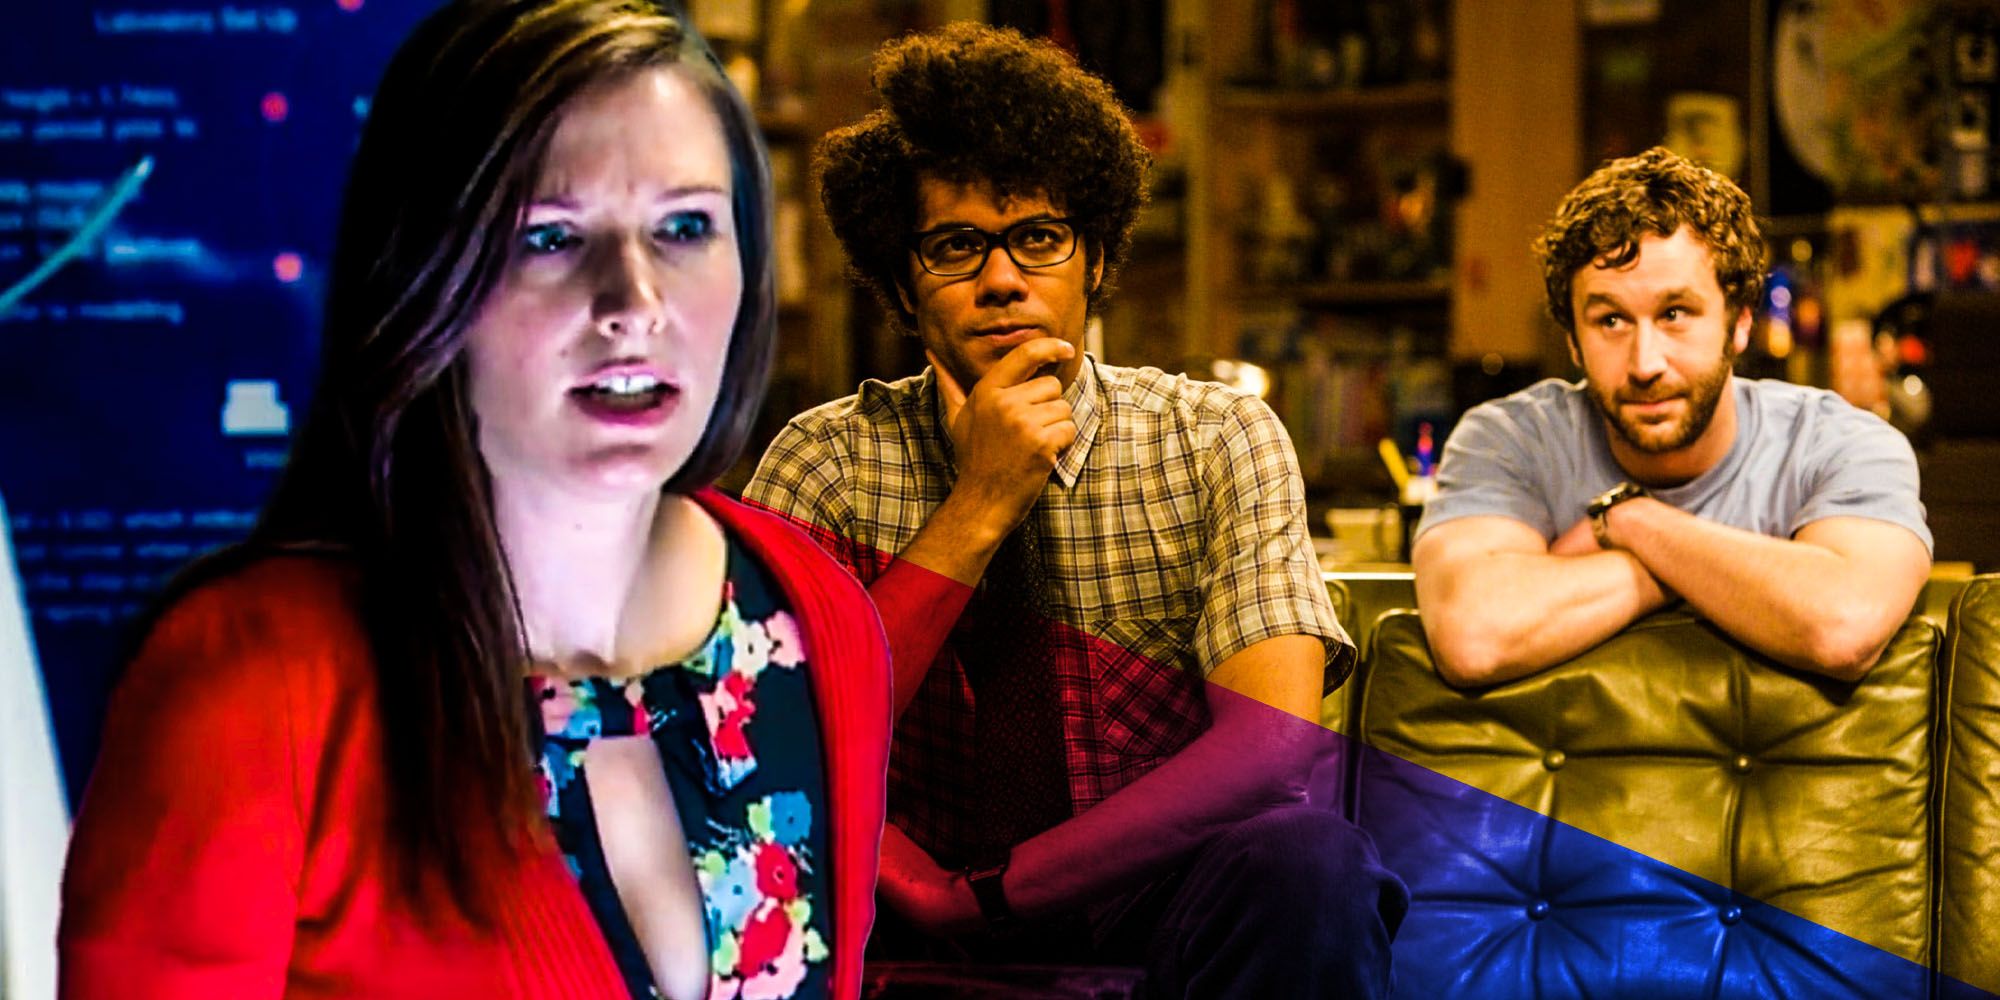 The IT Crowd: The Controversial Episode That Killed The Hit Comedy Series